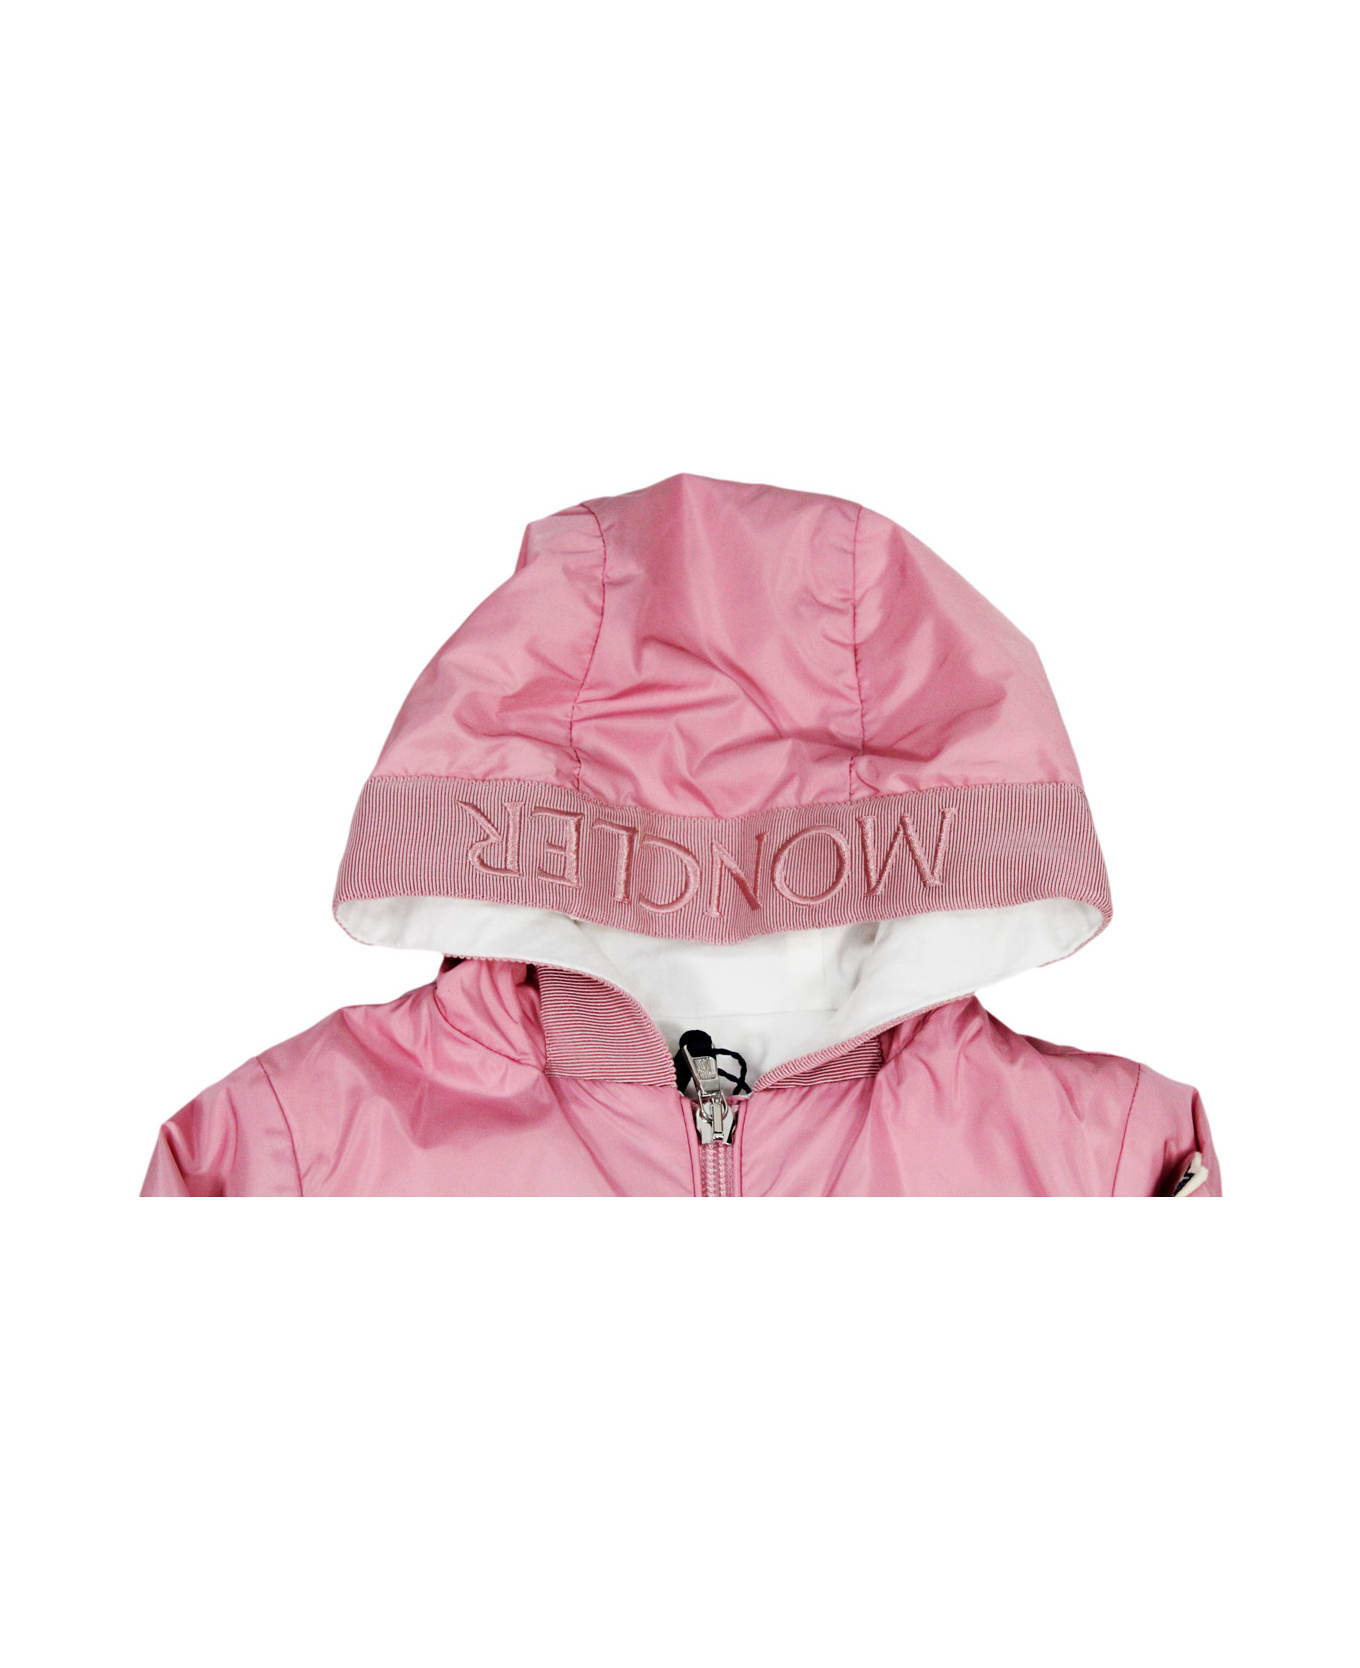 Moncler Light Nylon Messein Jacket With Hood And Zip CloAva With Logo Printed On The Arm. - Pink